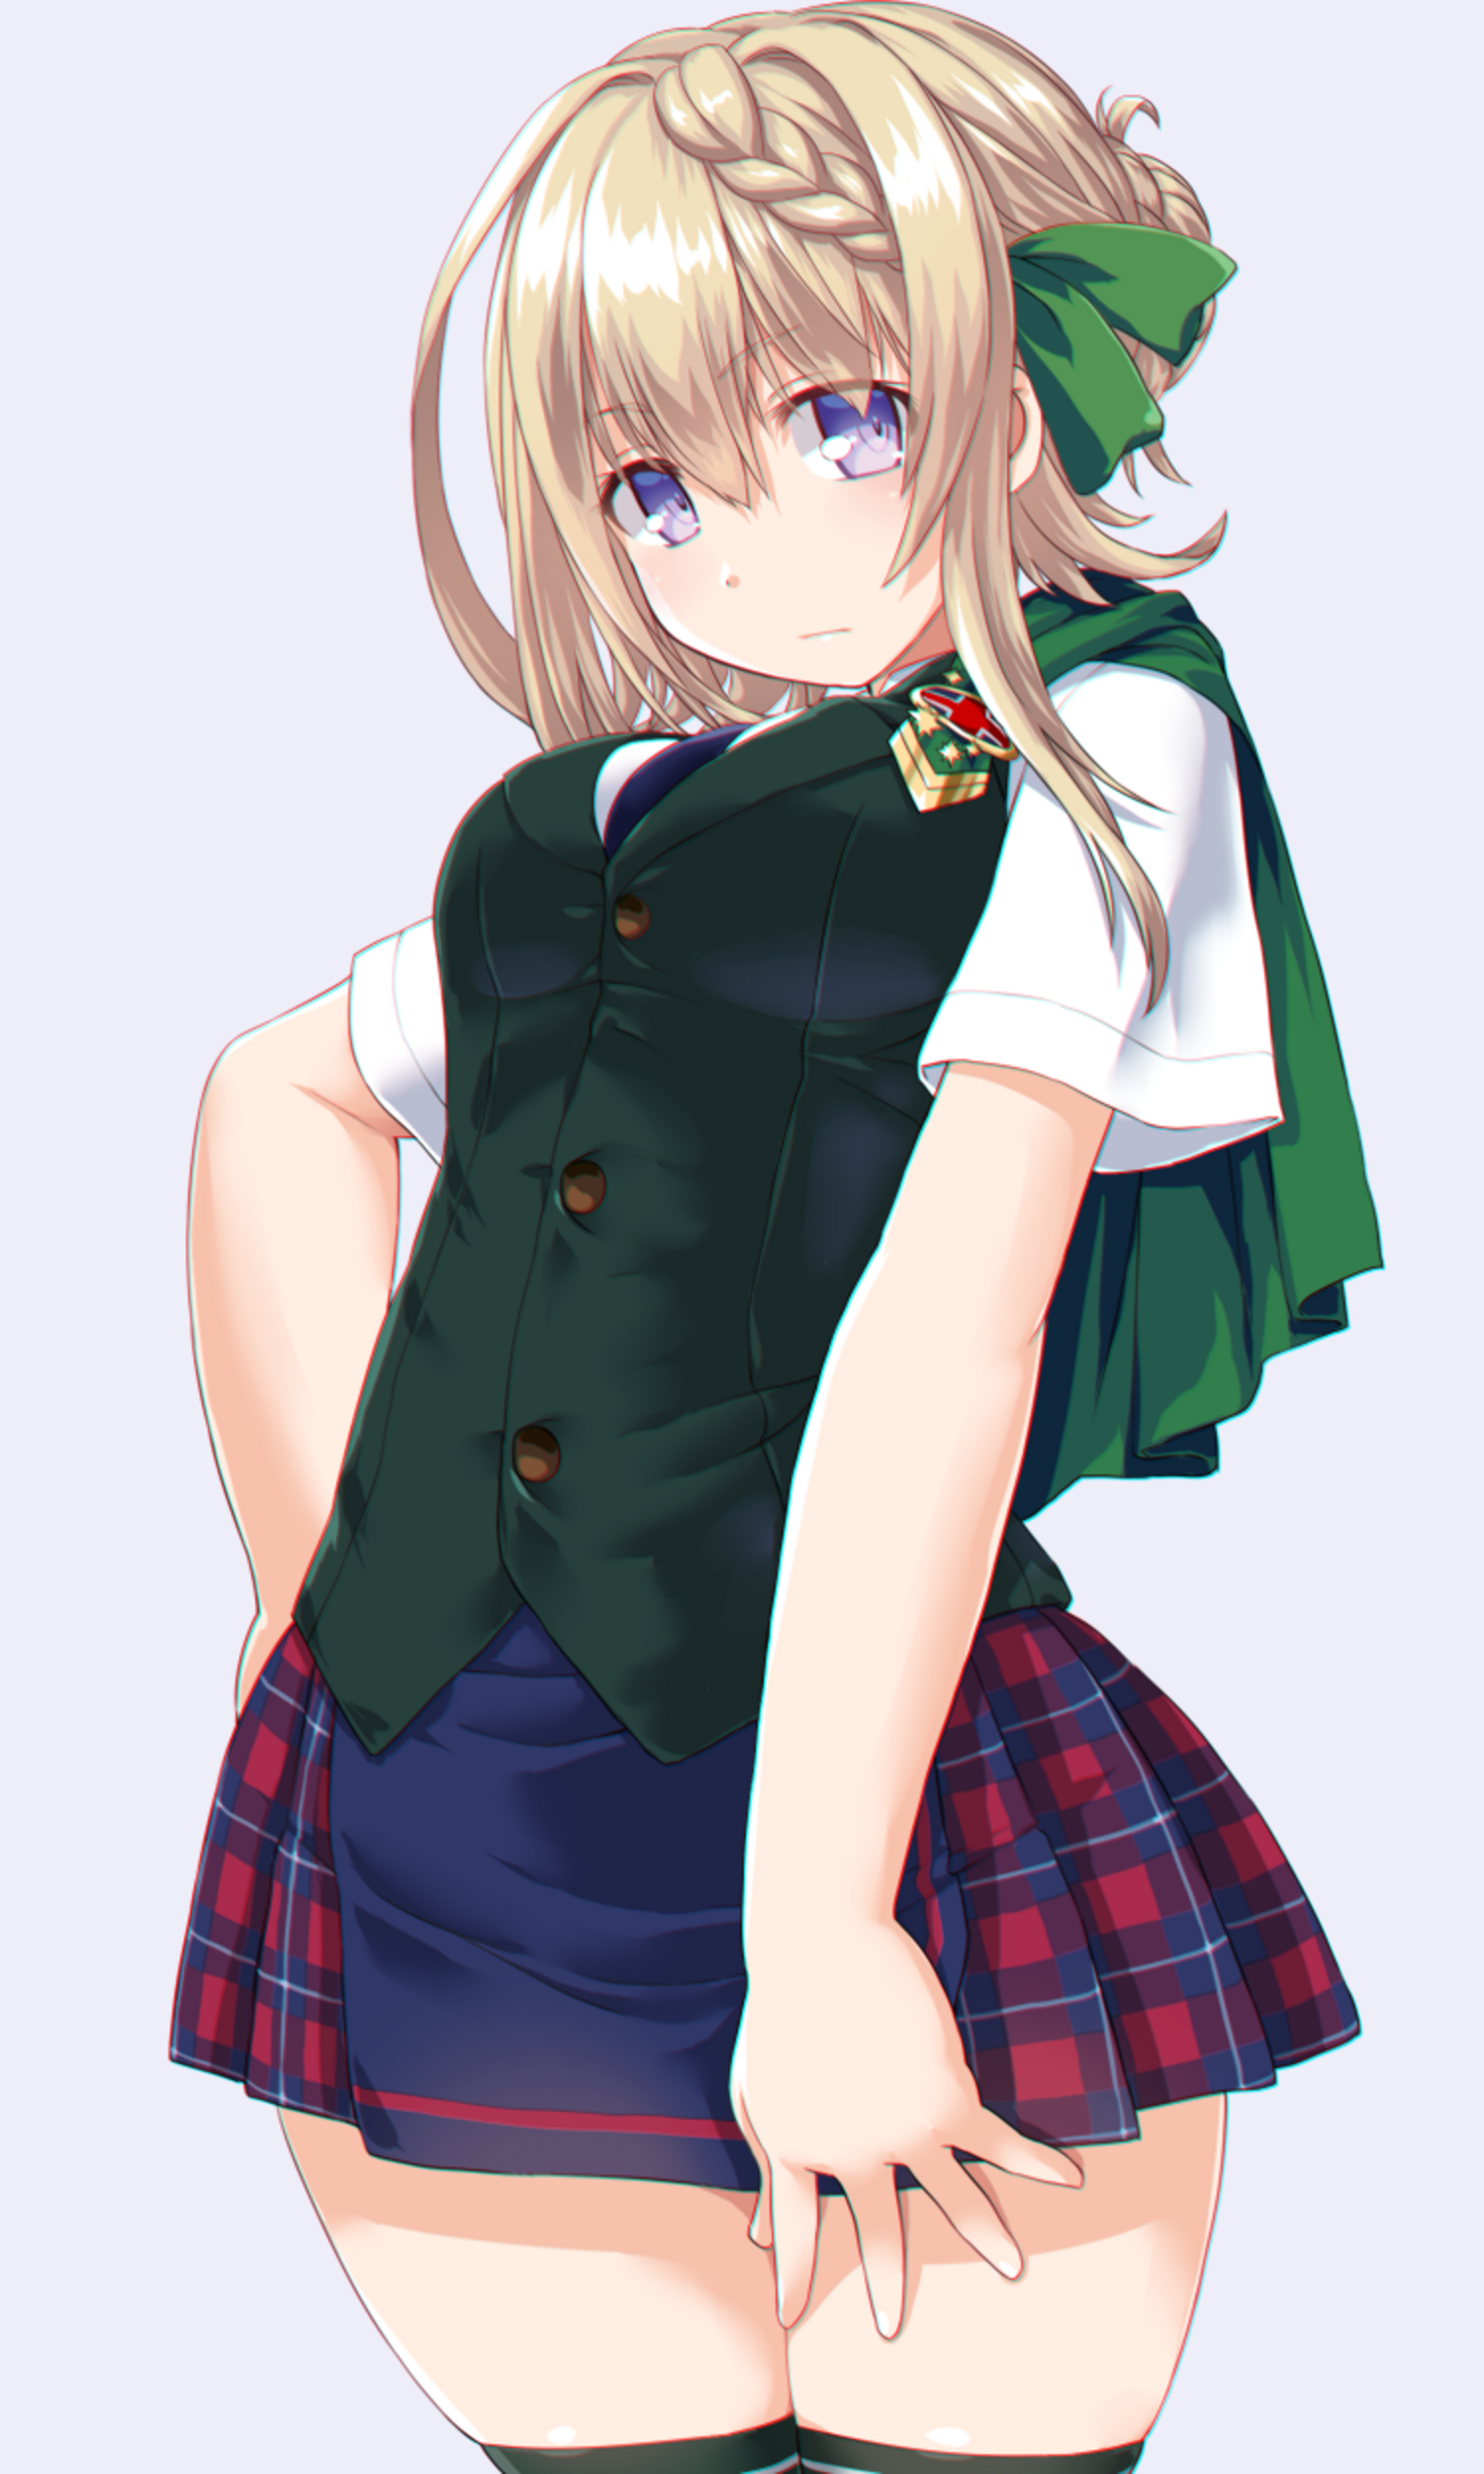 Anime 1500x2500 anime anime girls Kantai Collection Perth (KanColle) long hair blonde solo artwork digital art fan art skirt thighs sad white background standing green clothing plaid skirt looking at viewer